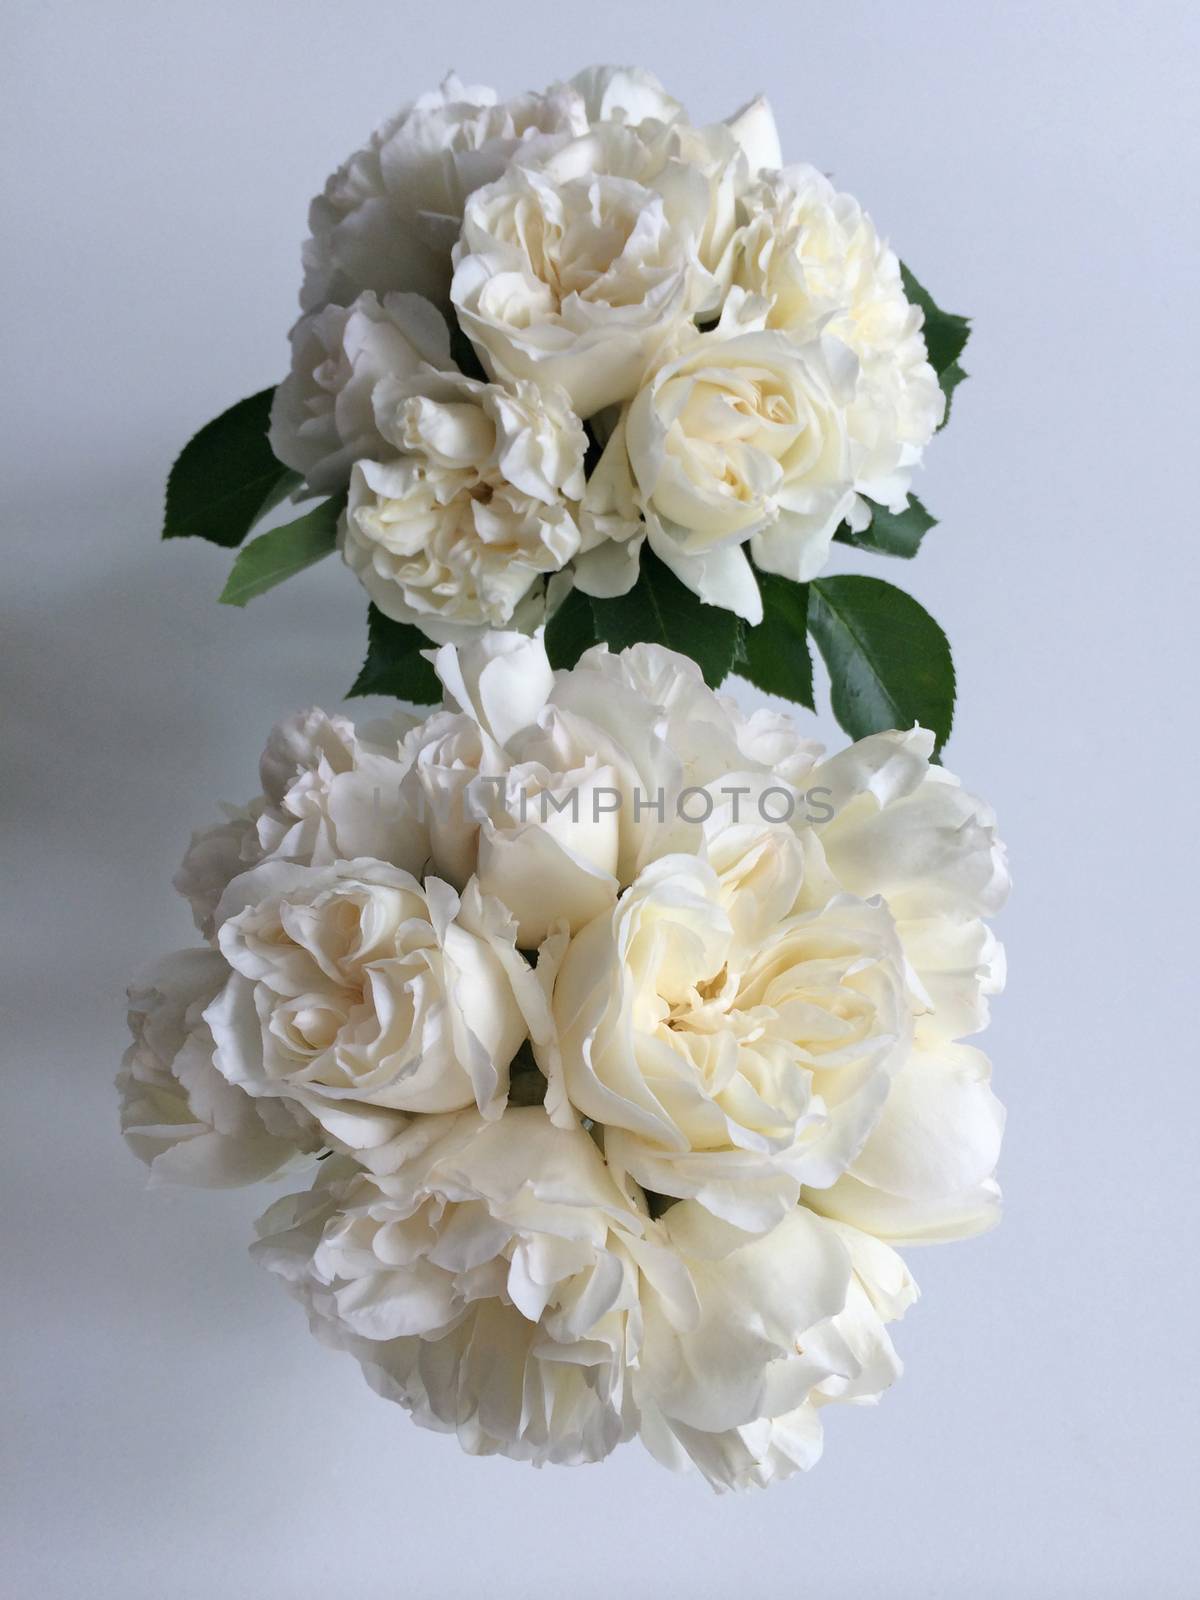 Two bouquets of white tea roses